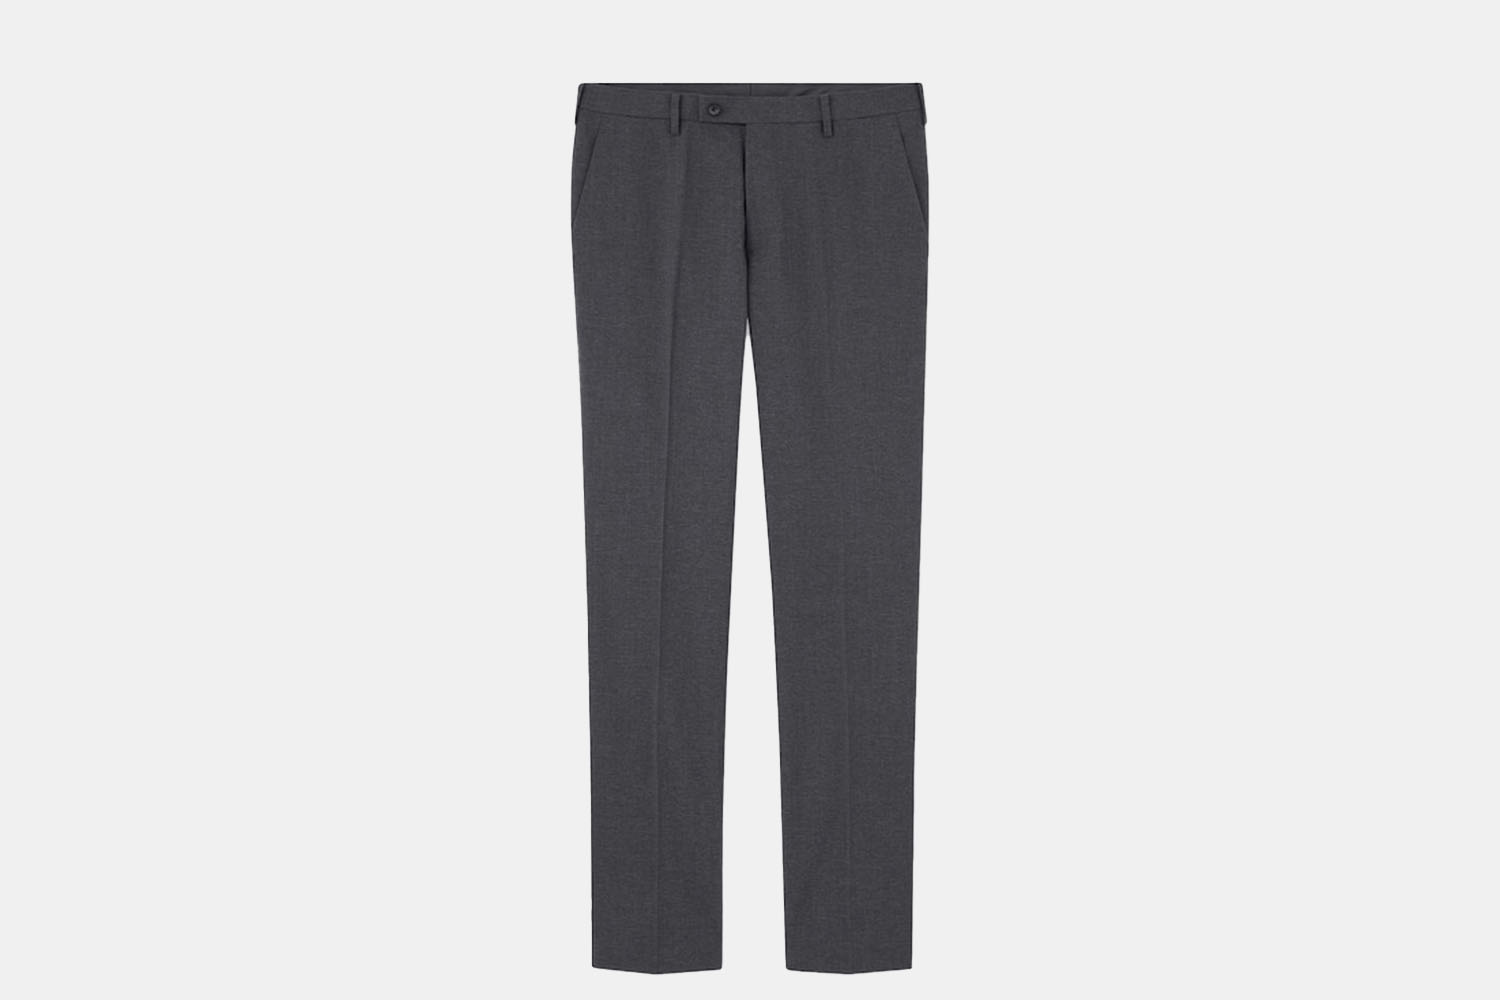 a pair of grey Uniqlo pants.